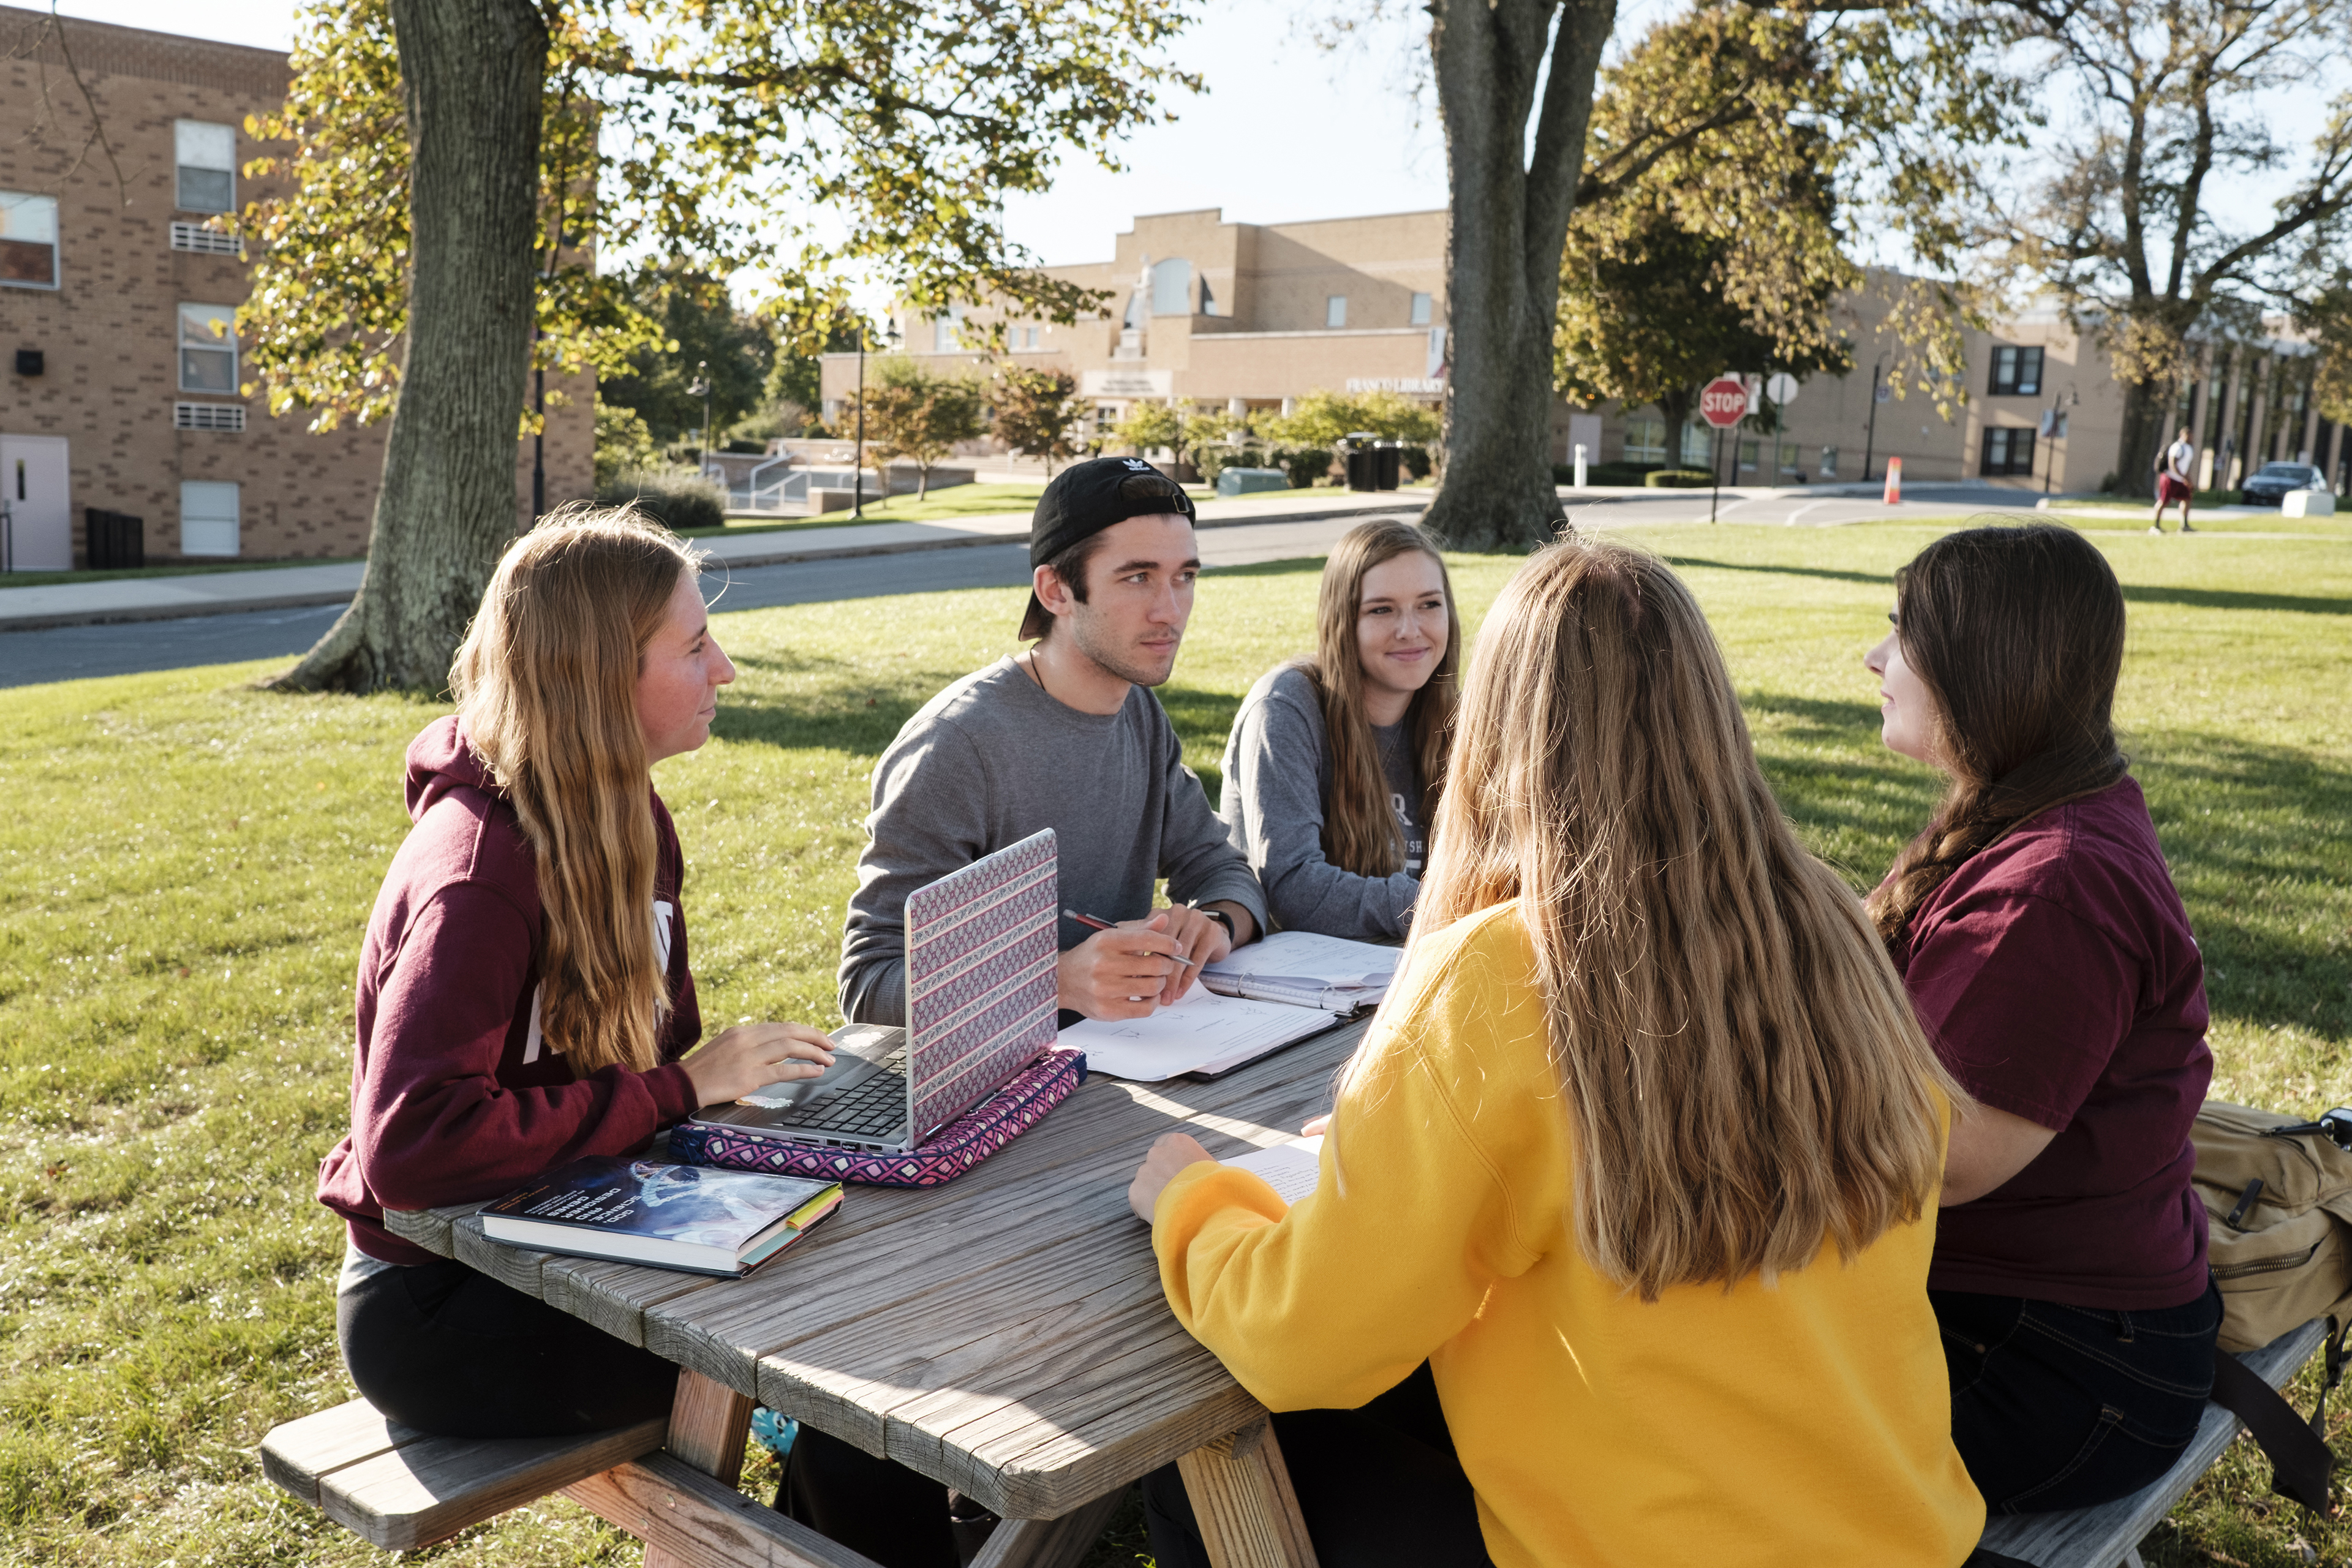 Students studying together at a picnic table